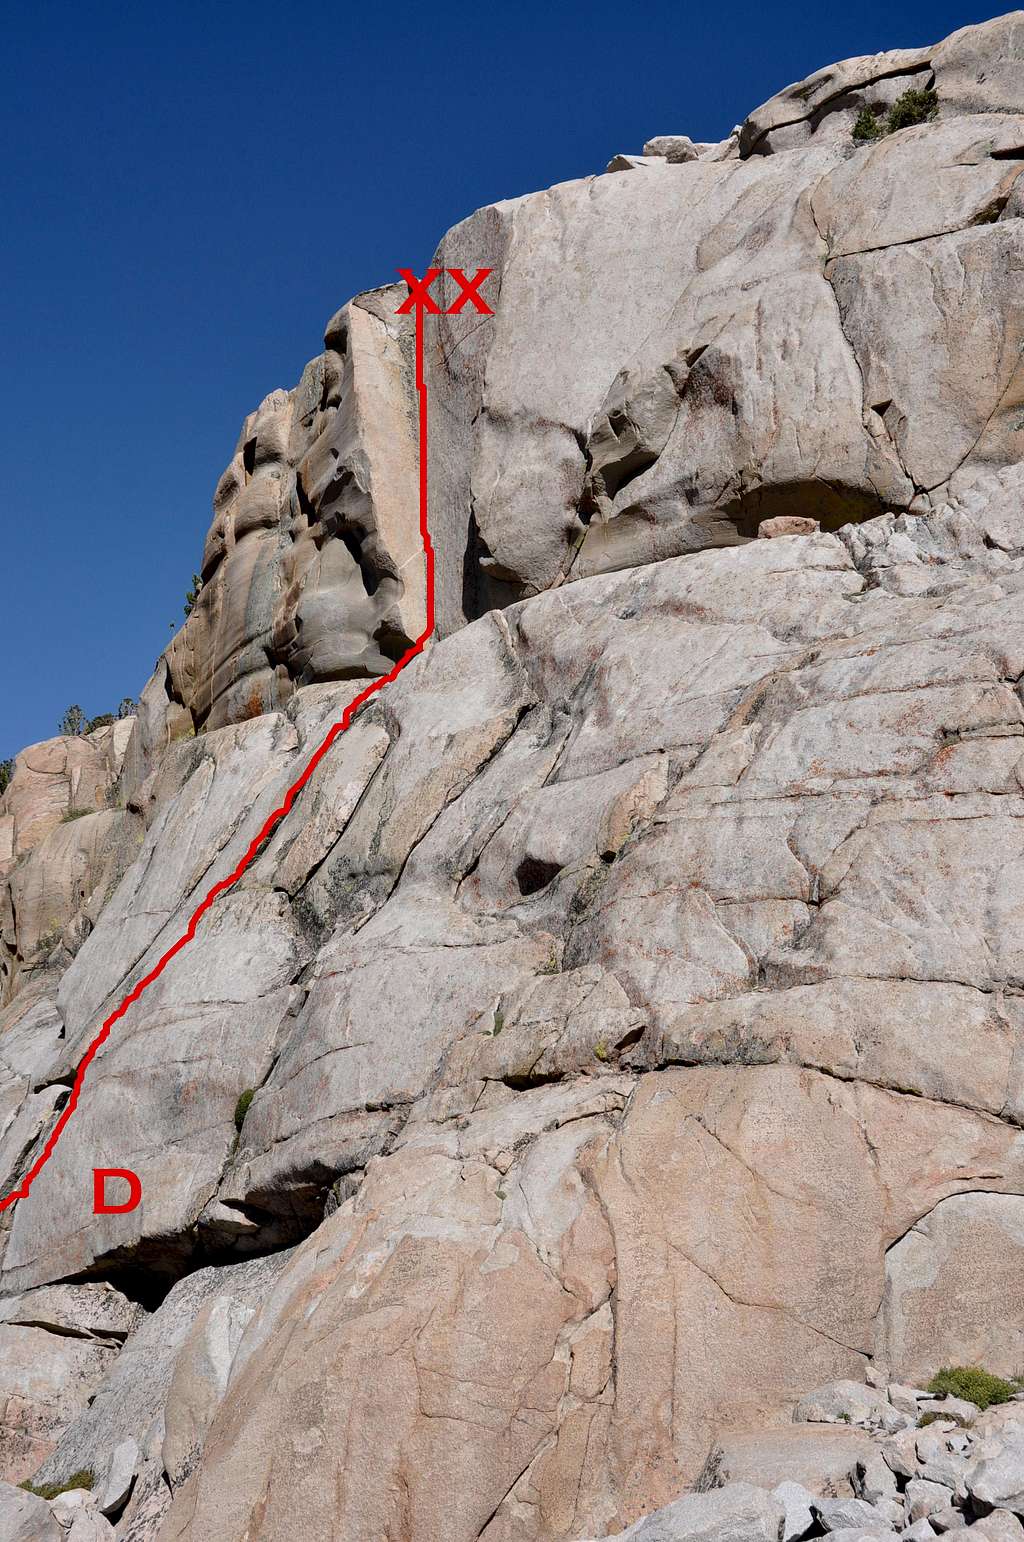 The Dihedral, 10a on the lower formation